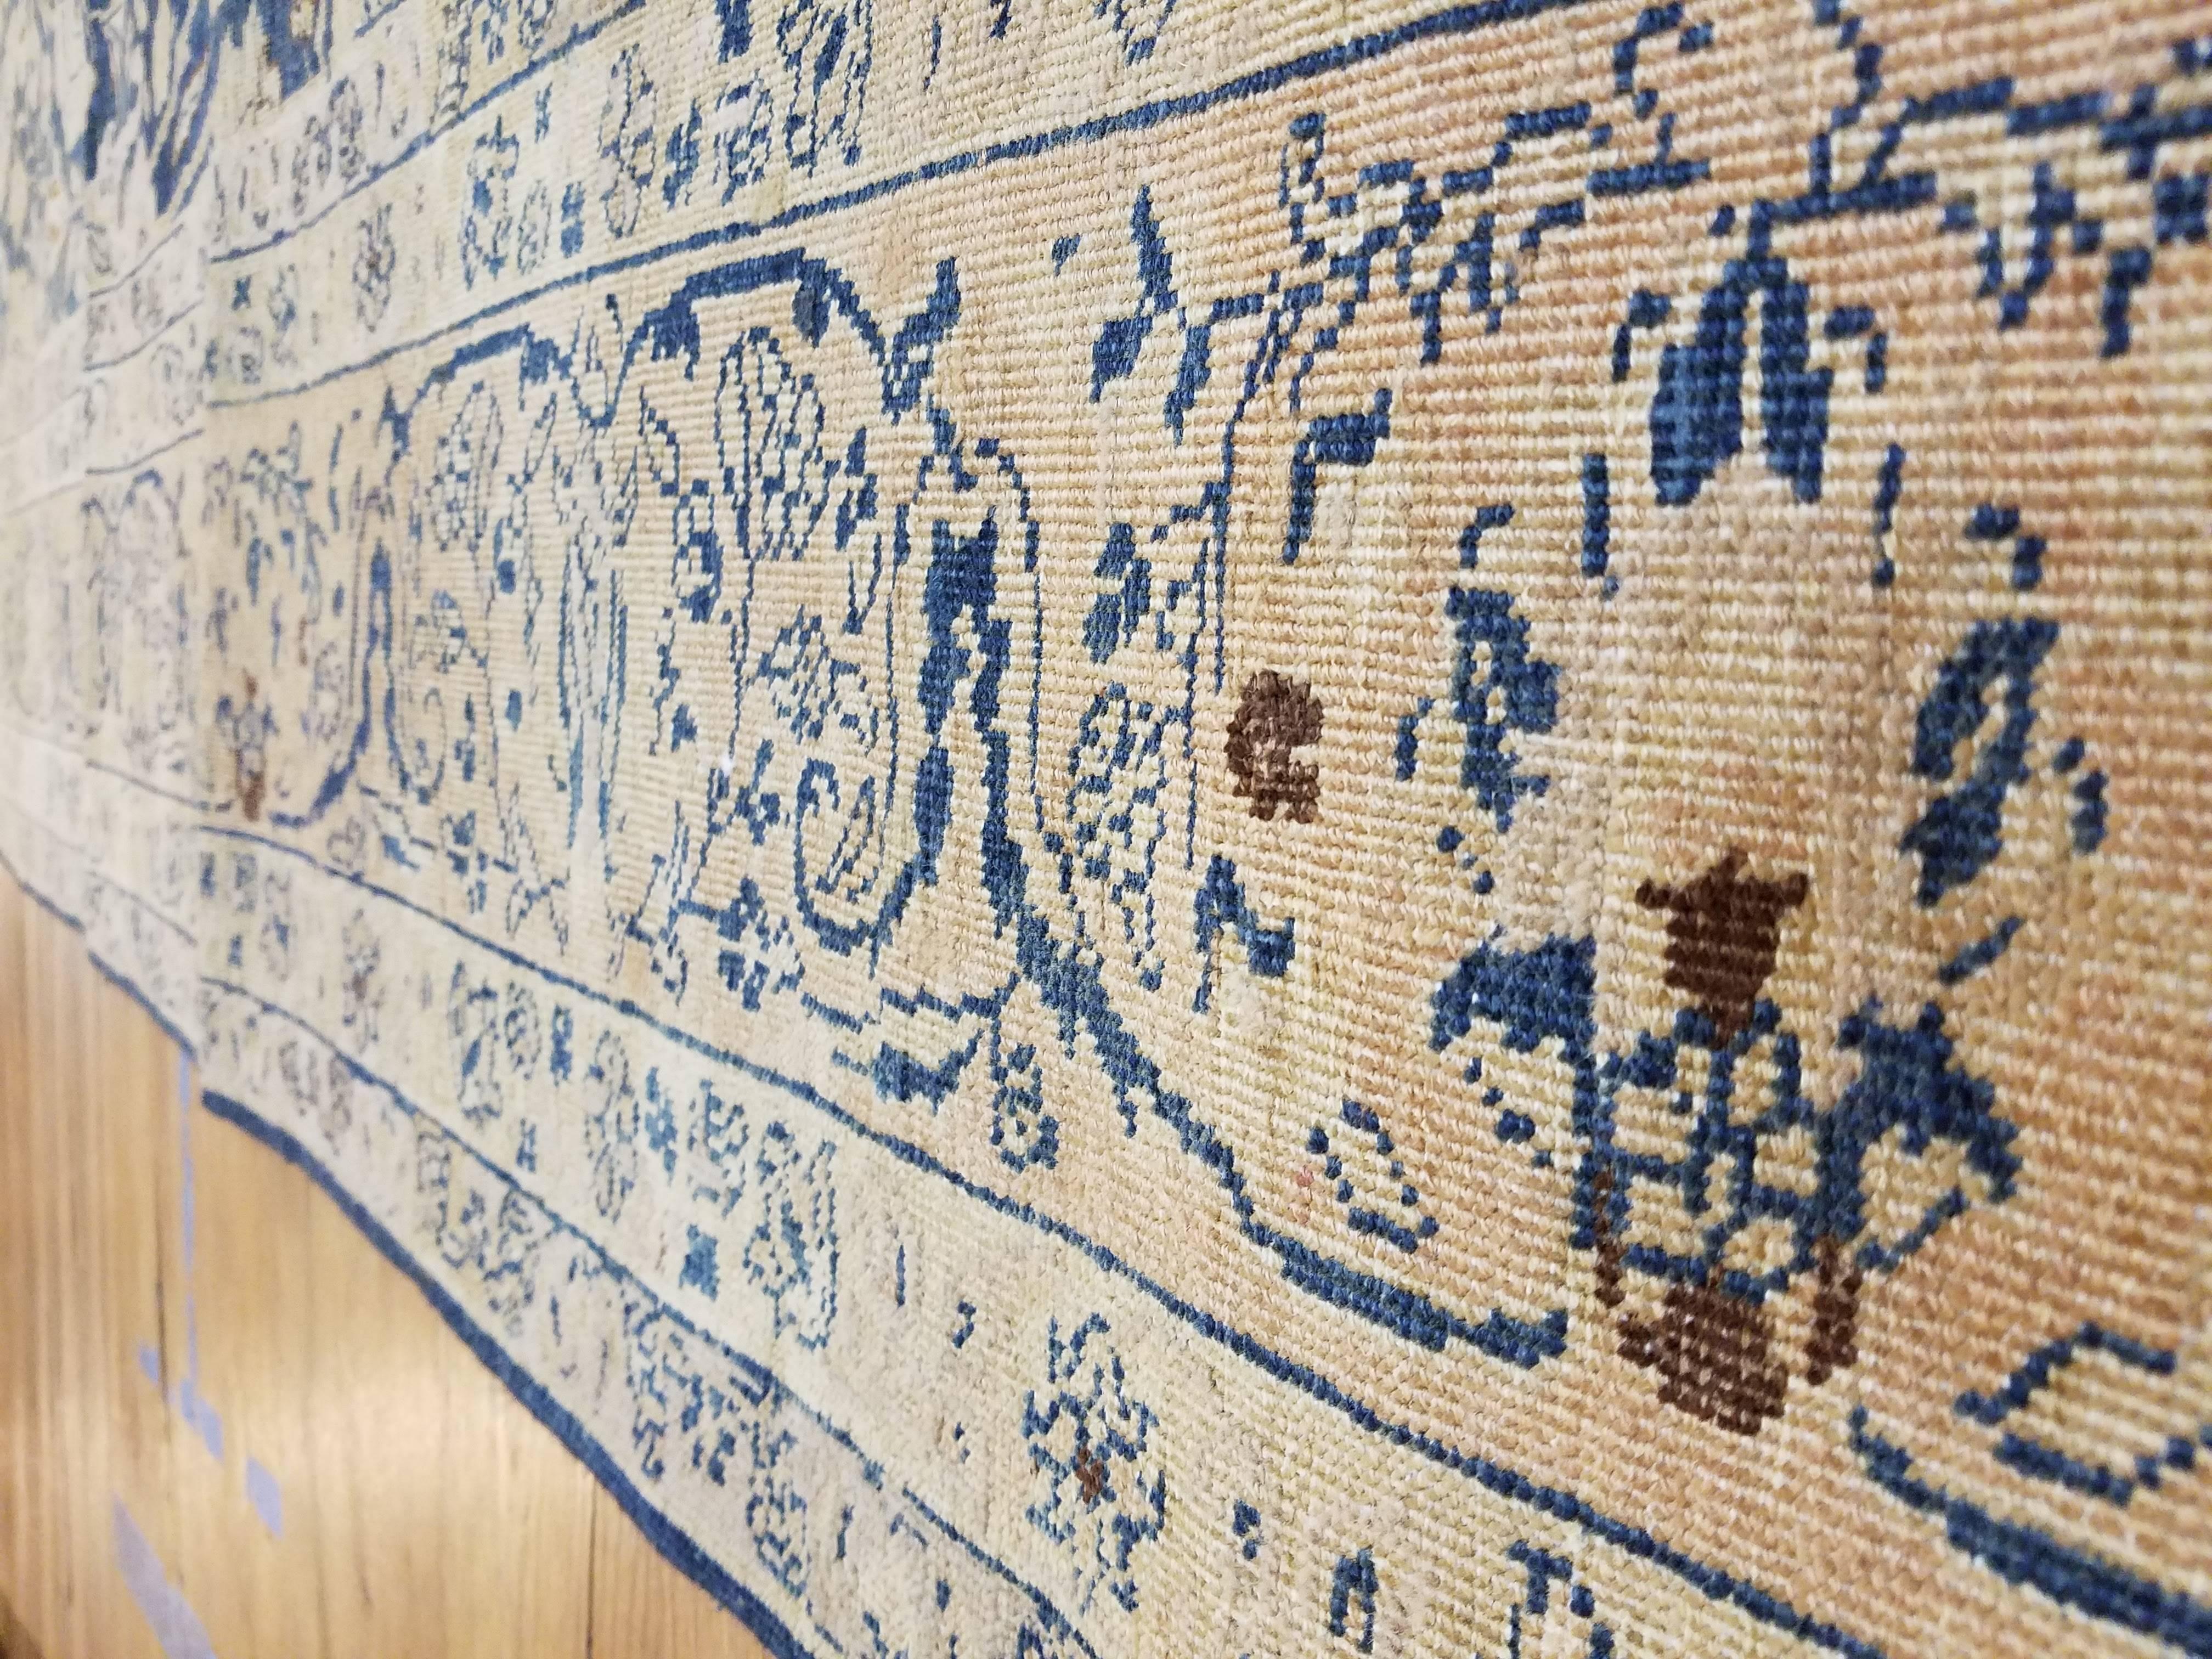 Antique Tabriz Carpet, Handmade Persian Rug in Floral Gold, Blue and Taupe In Good Condition For Sale In Port Washington, NY